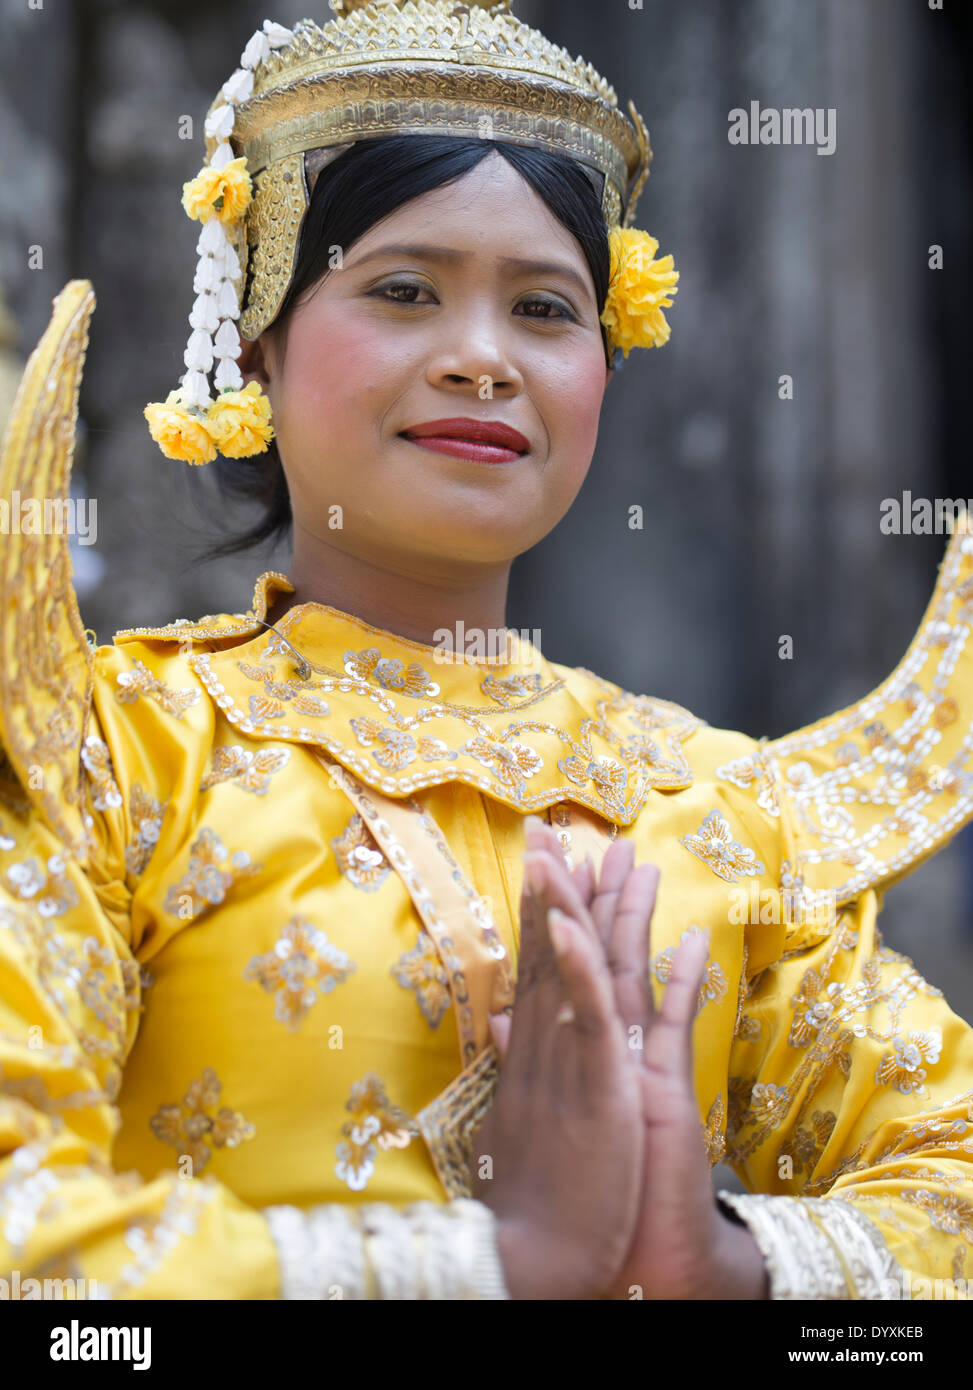 Khmer Dancer in Apsara costume at Bayon Temple within the walls of Angkor Thom, Siem Reap, Cambodia Stock Photo